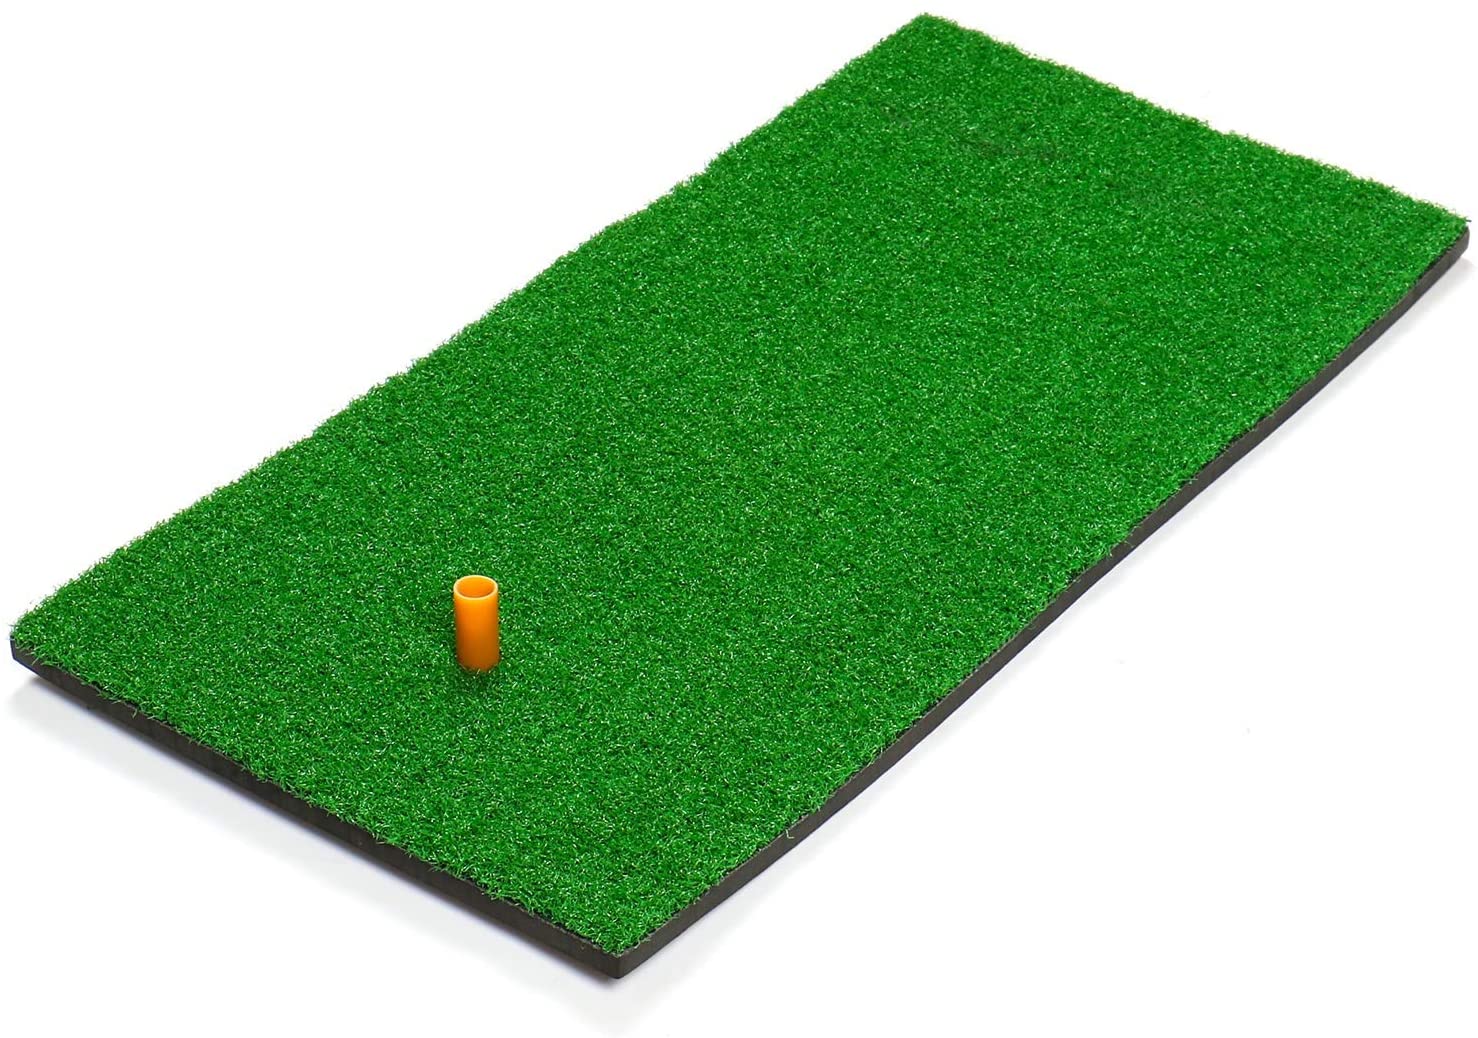 GolfBasic Golf Turf Practice SINGLE GRASS Mat for Driving Hitting Chipping